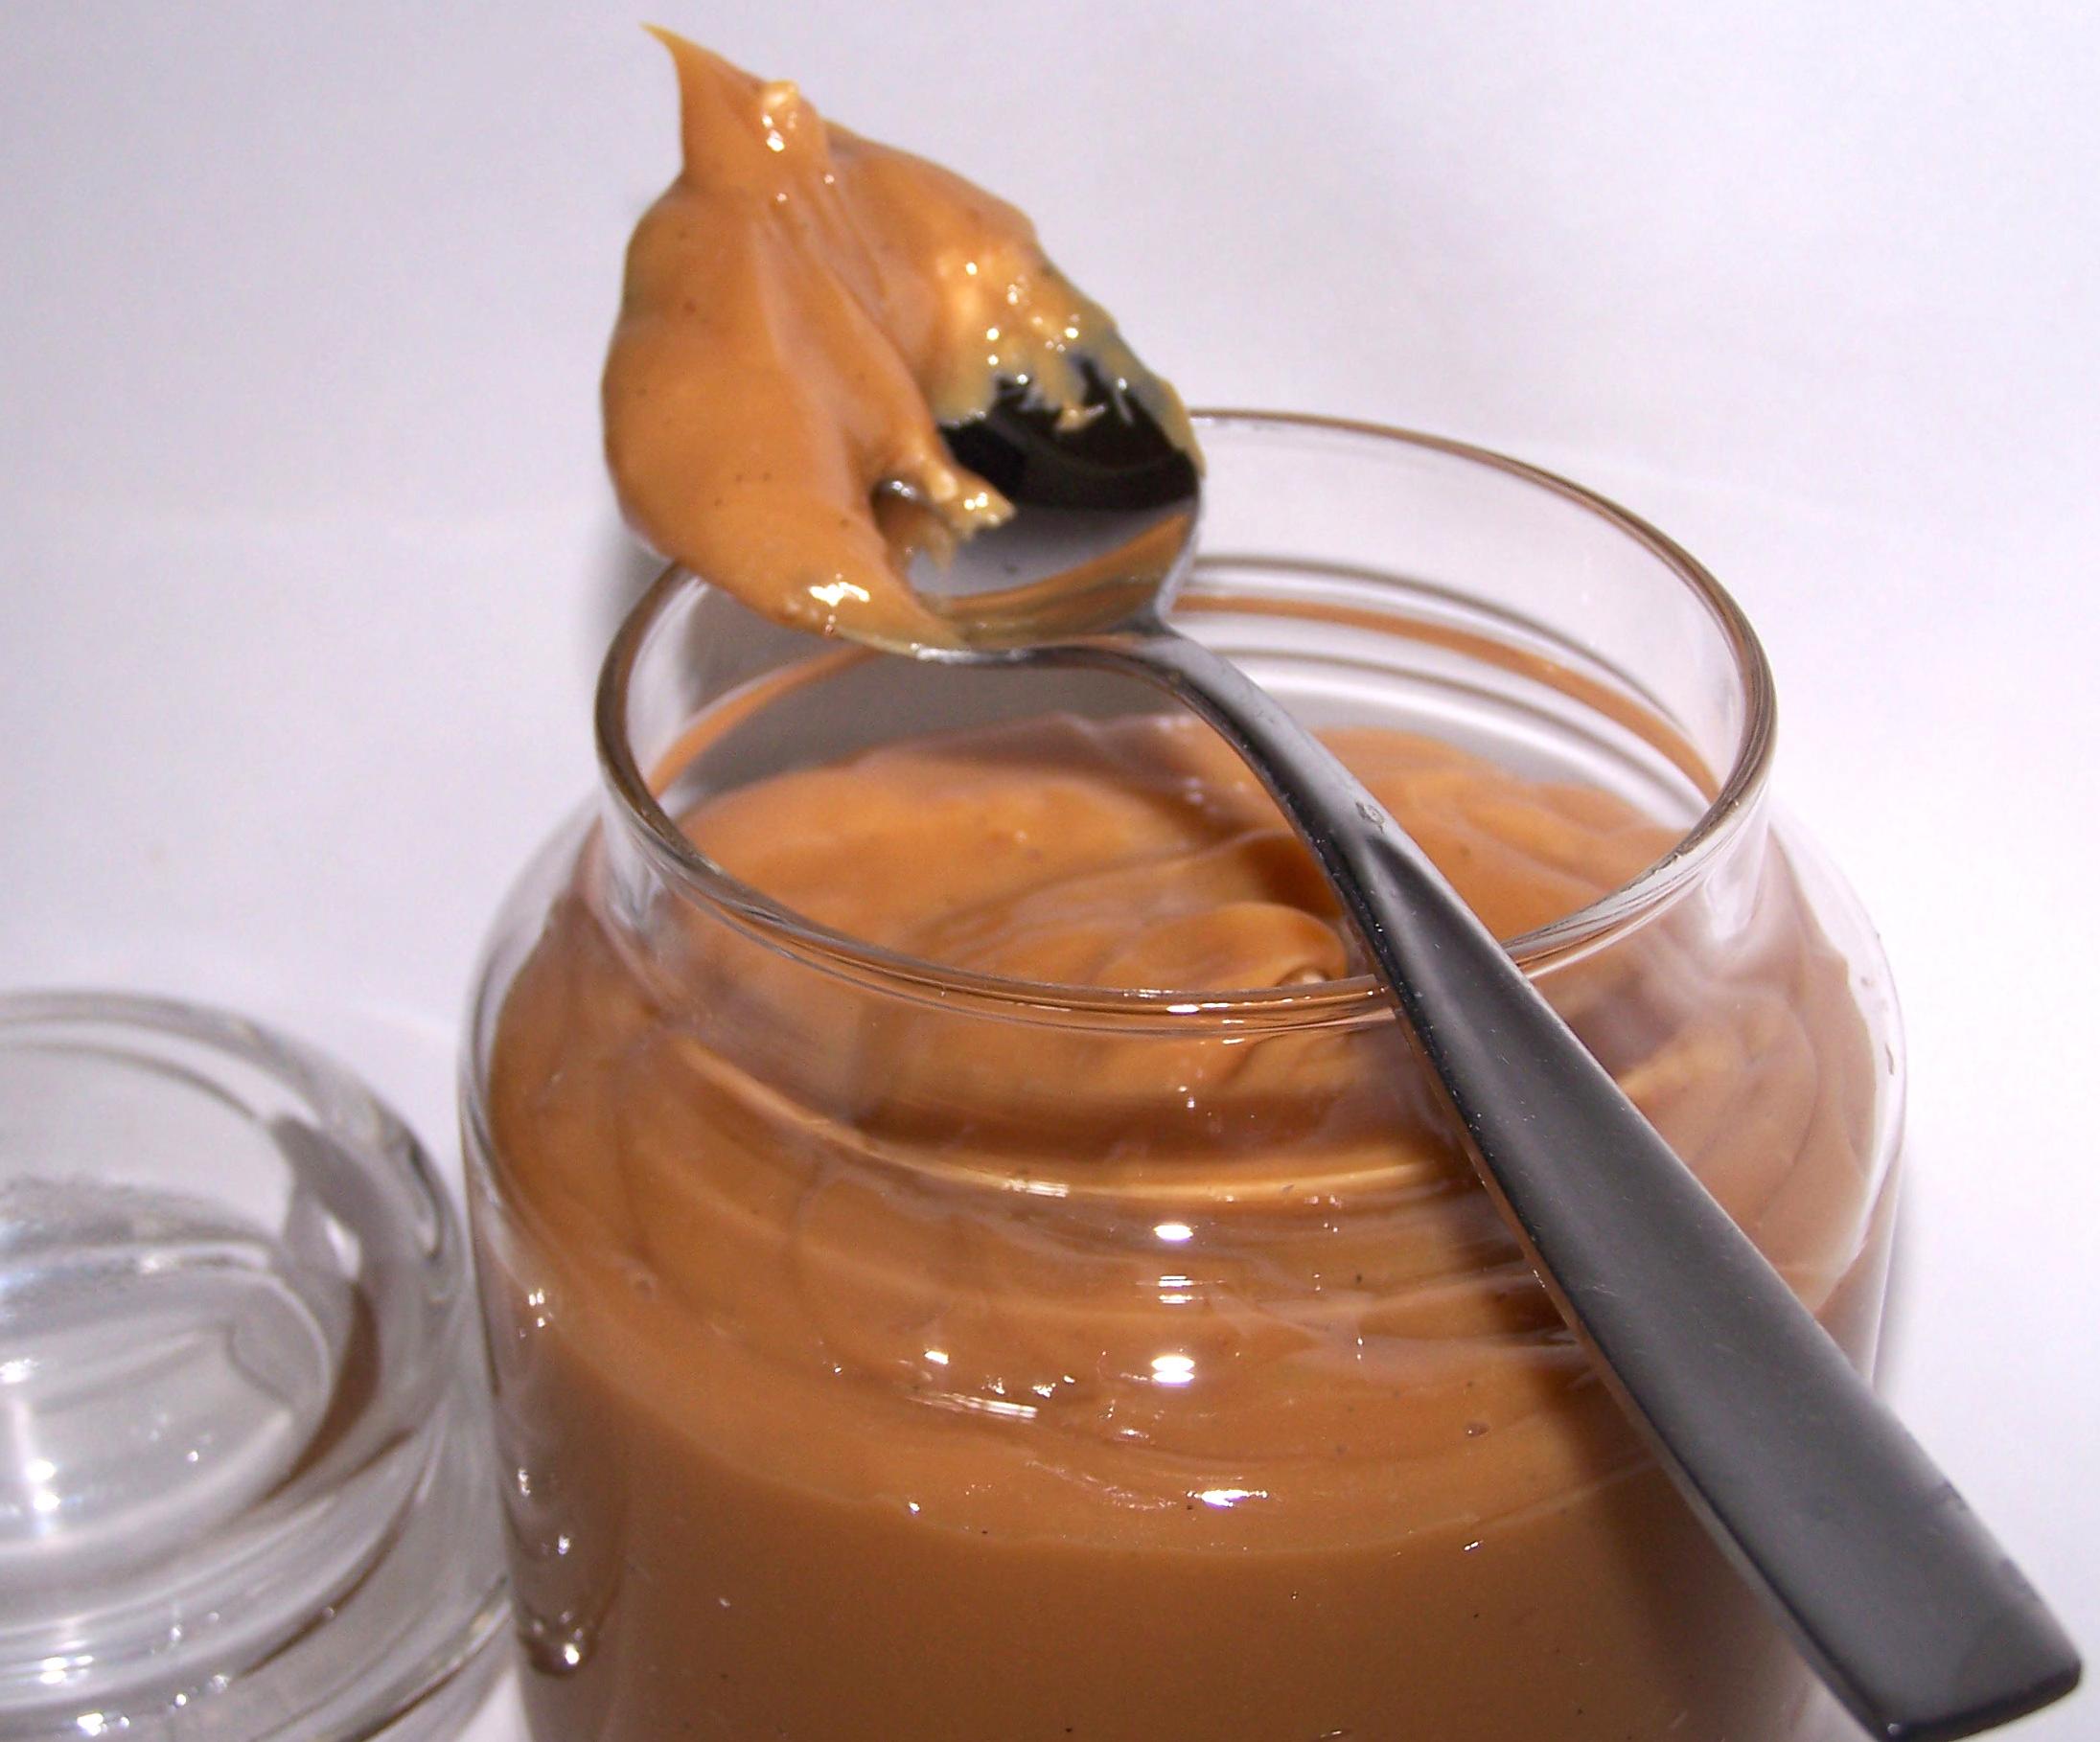  Dulce de Leche is a versatile ingredient that can be used in a wide range of dishes, from cakes and cookies to ice cream and milkshakes.